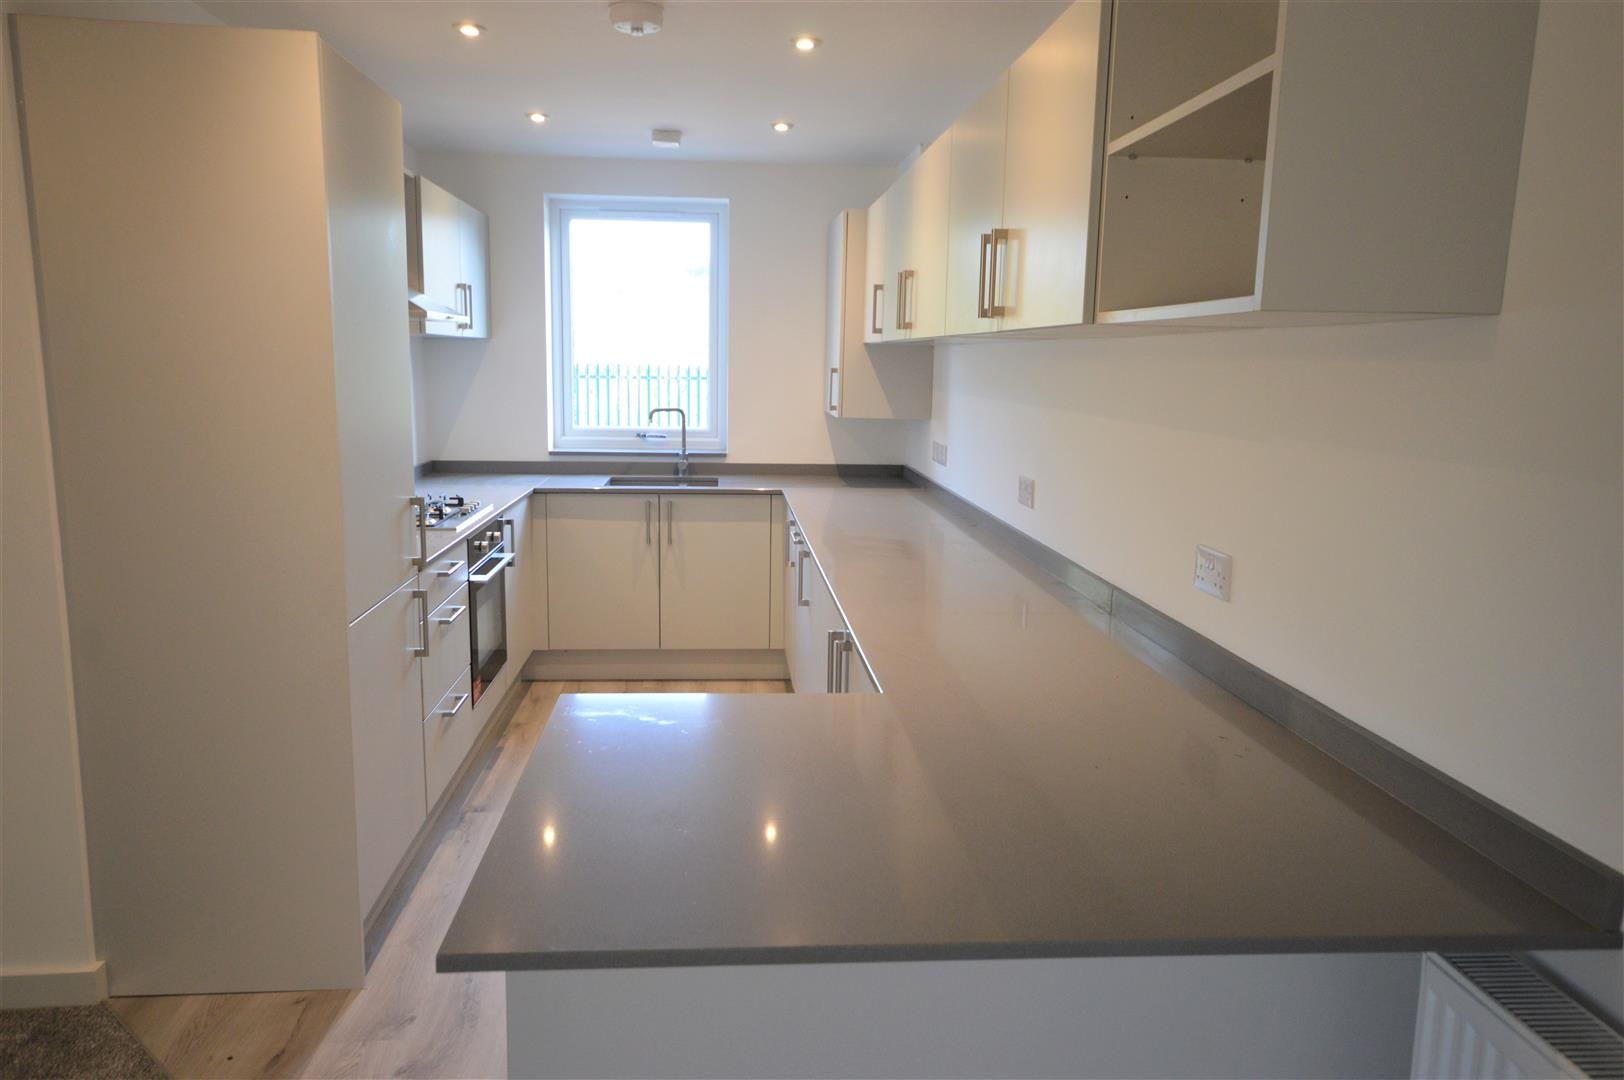 2 bed terraced for sale in Leominster 5